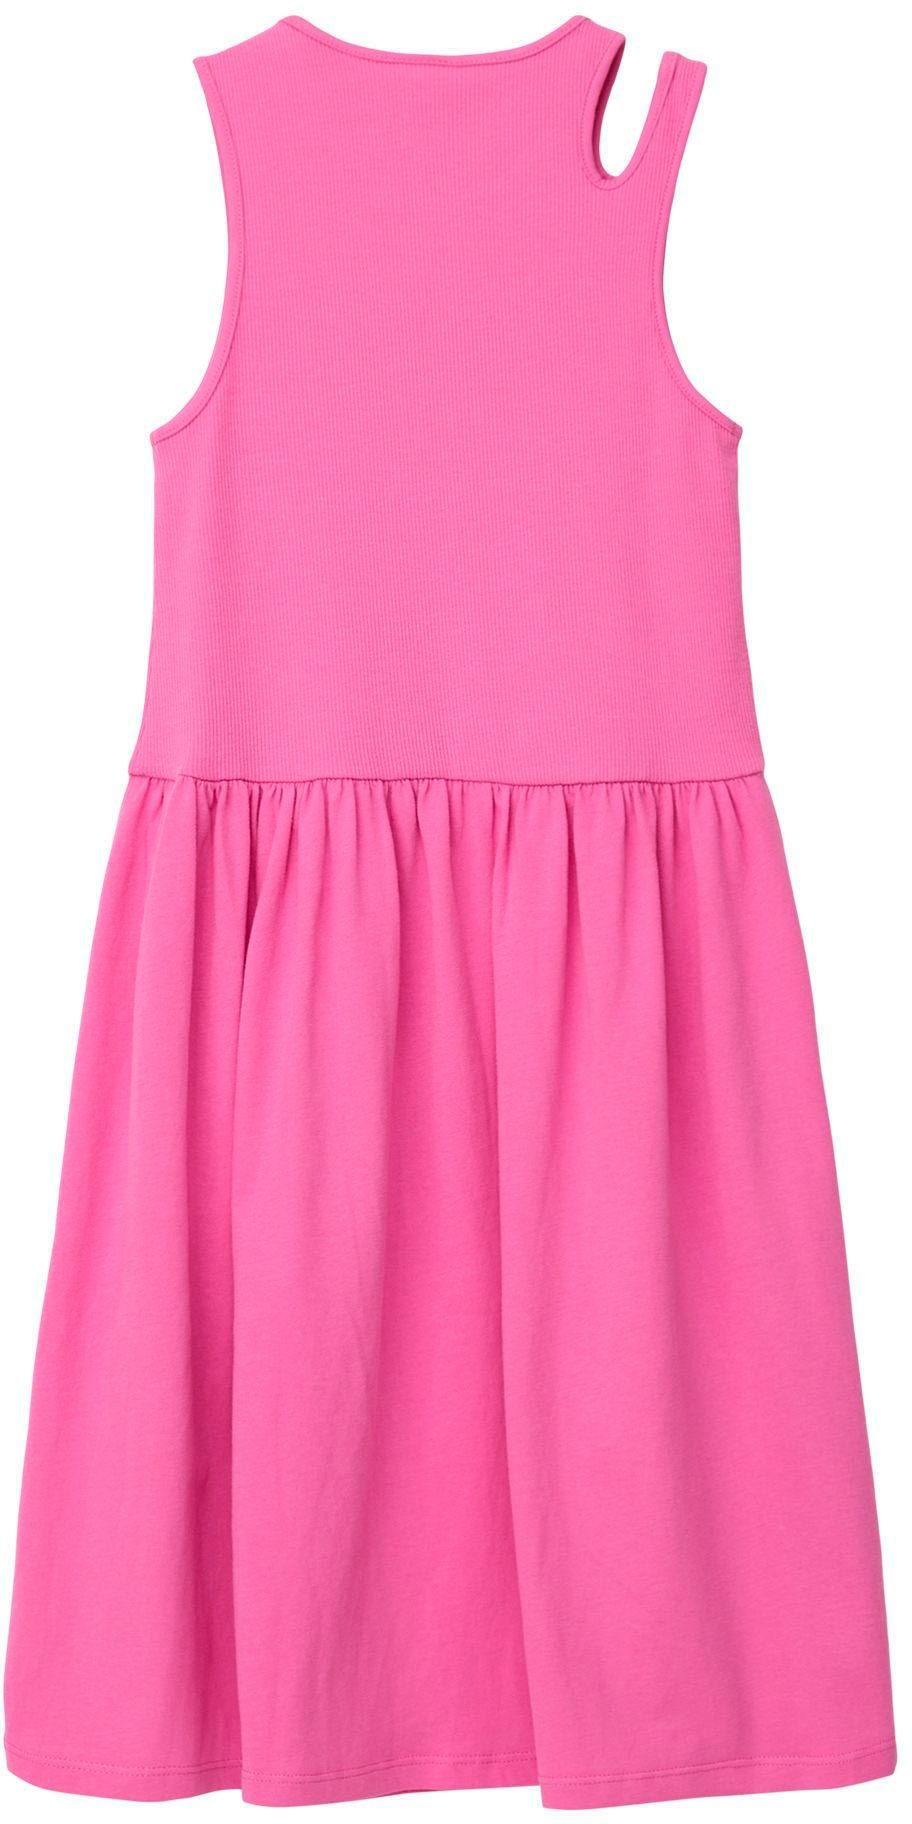 Cut-out Junior Minikleid lilac/pink s.Oliver mit